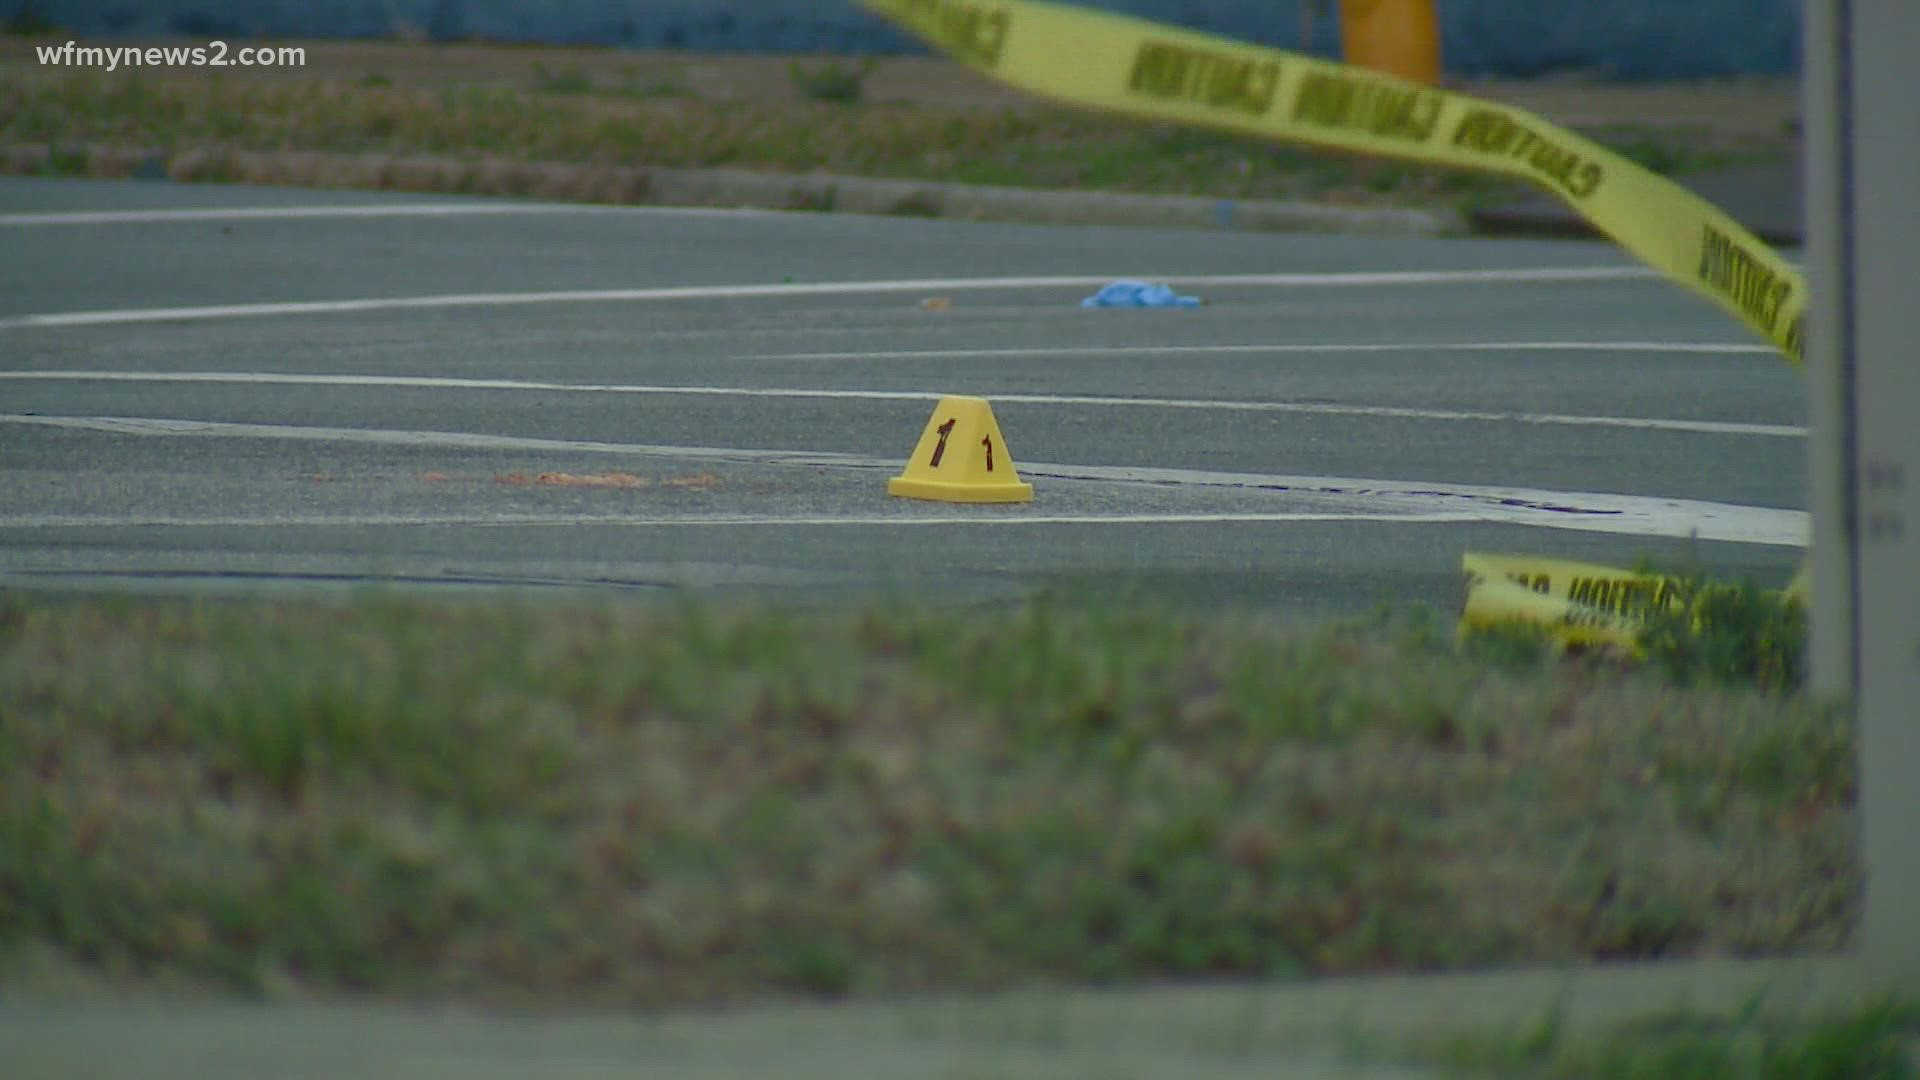 Winston-Salem police are searching for the suspects who shot and killed 2 people on Highway 52.